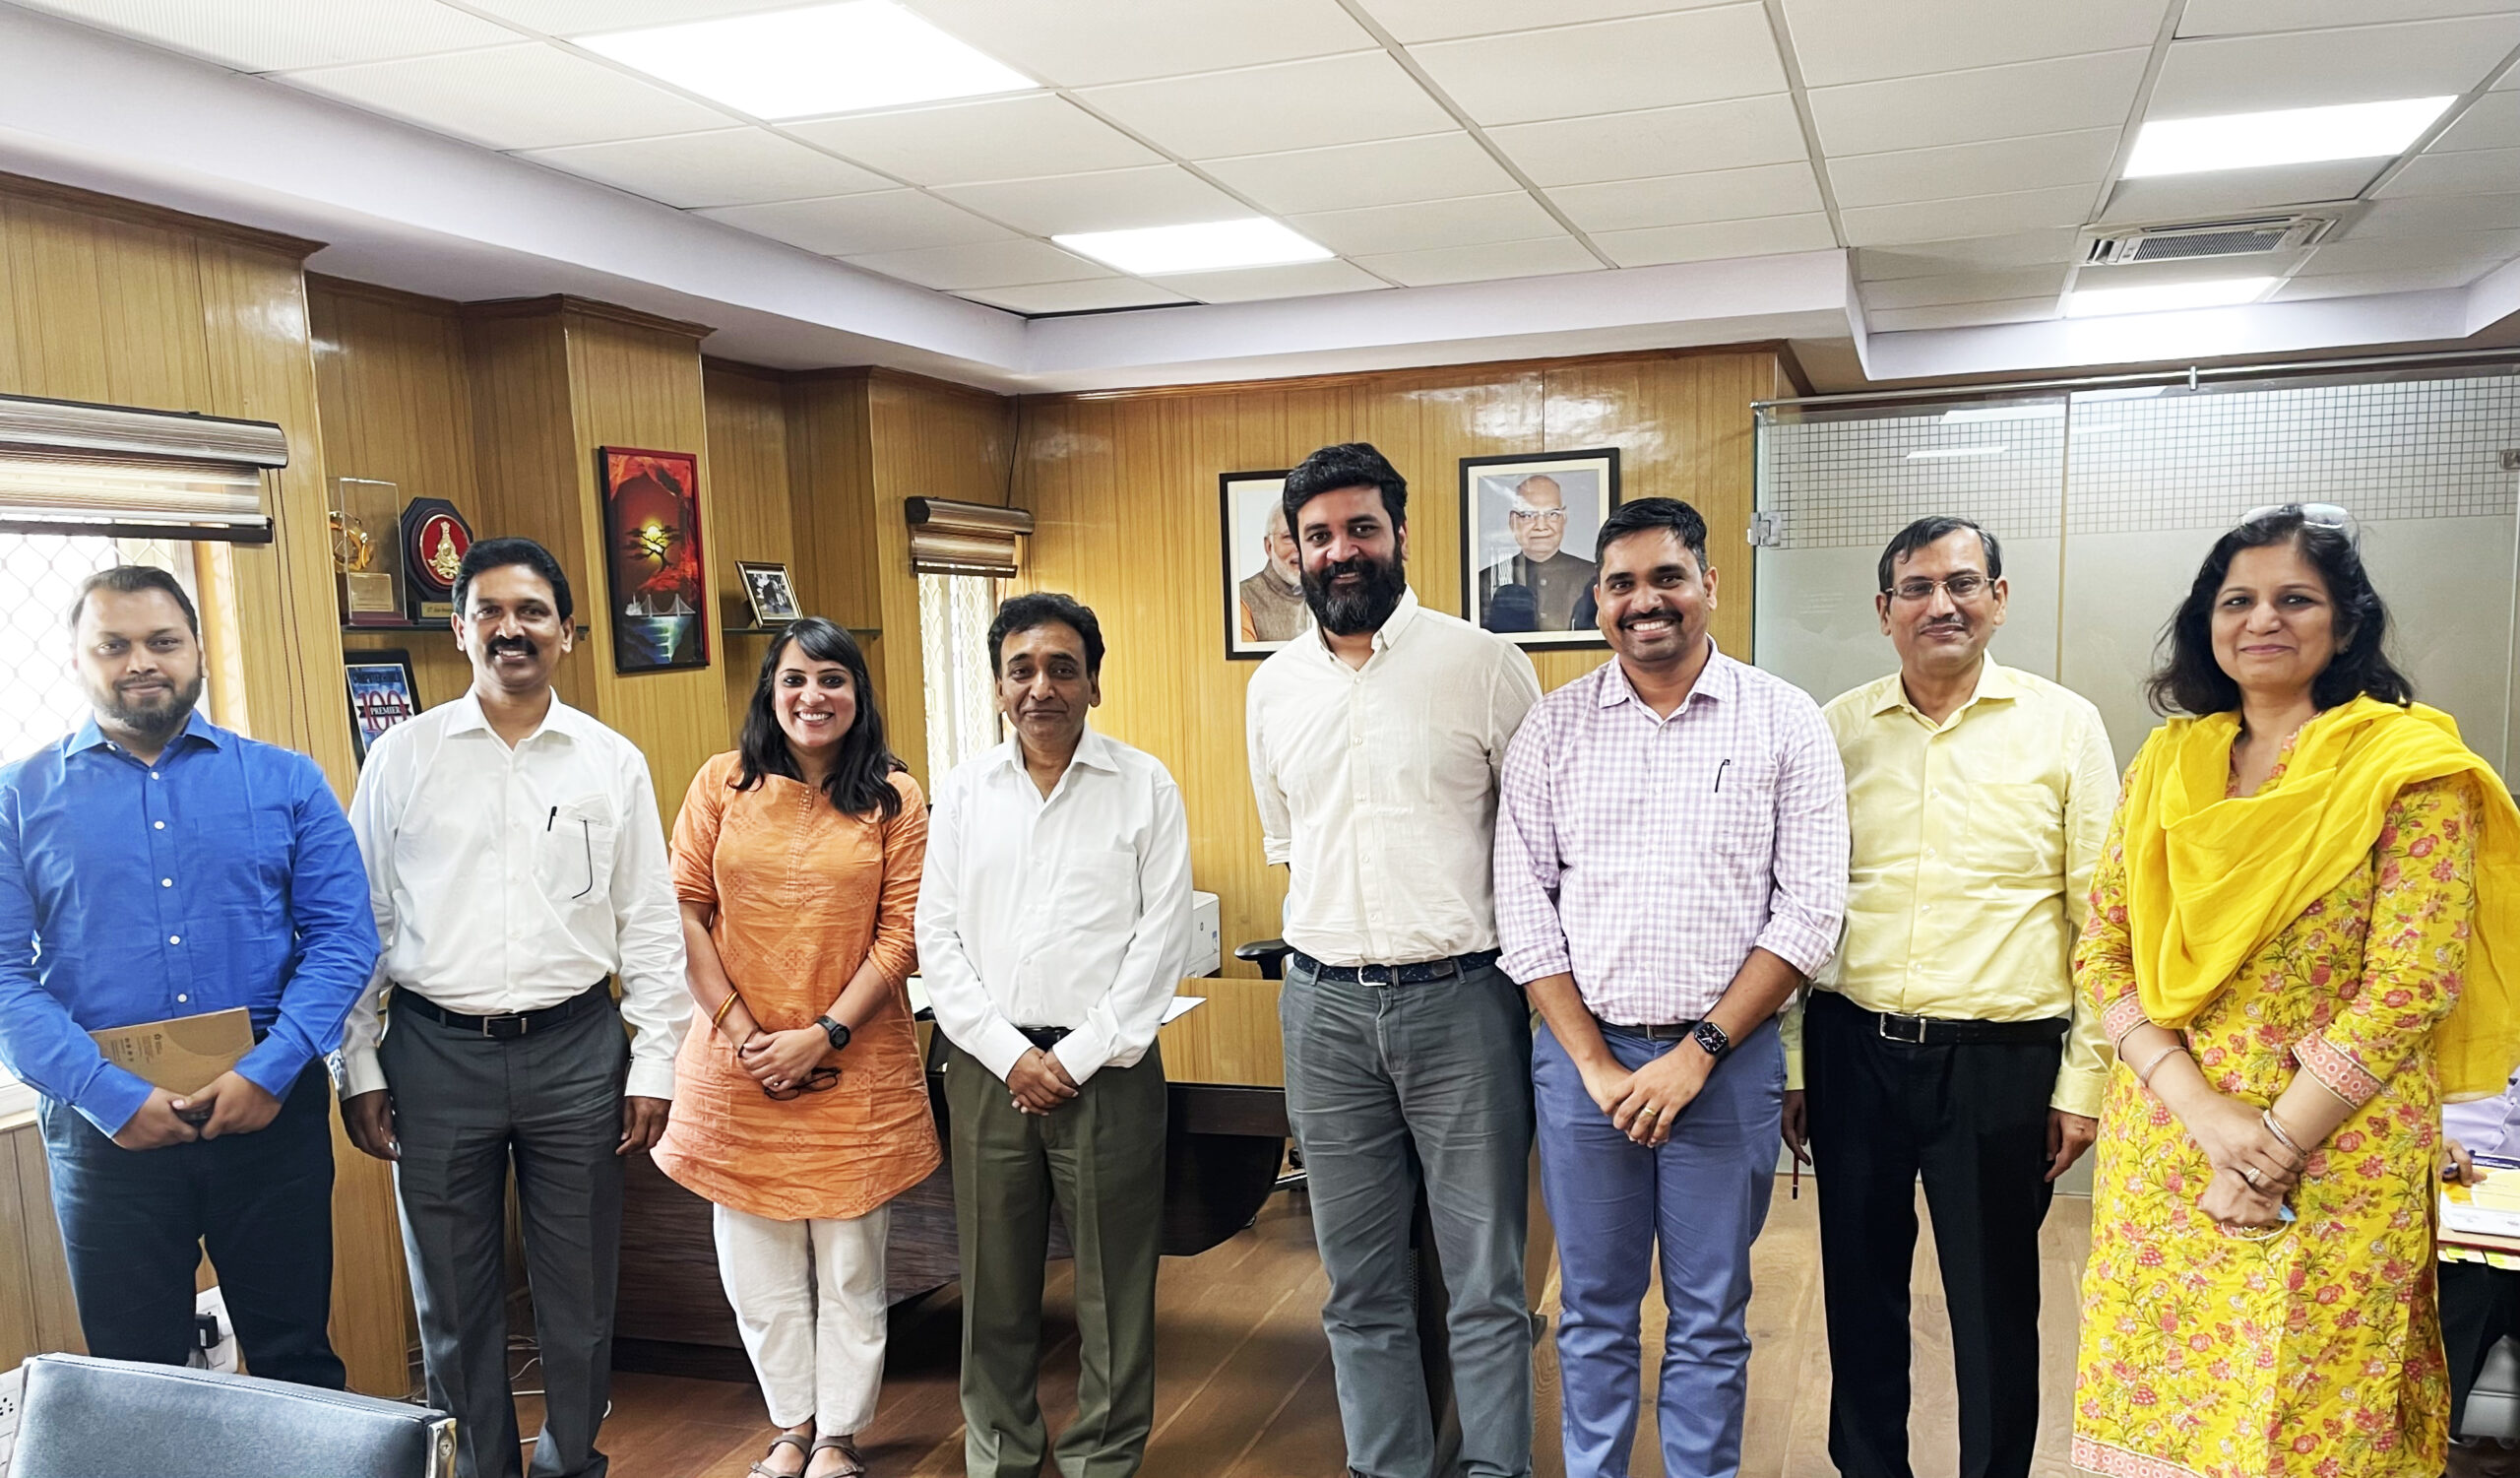 Rajesh-Agarwal-DGT-Director-with-the-Quest-Alliance-team-during-the-extension-of-MoU-with-MSDE-for-another-three-years-